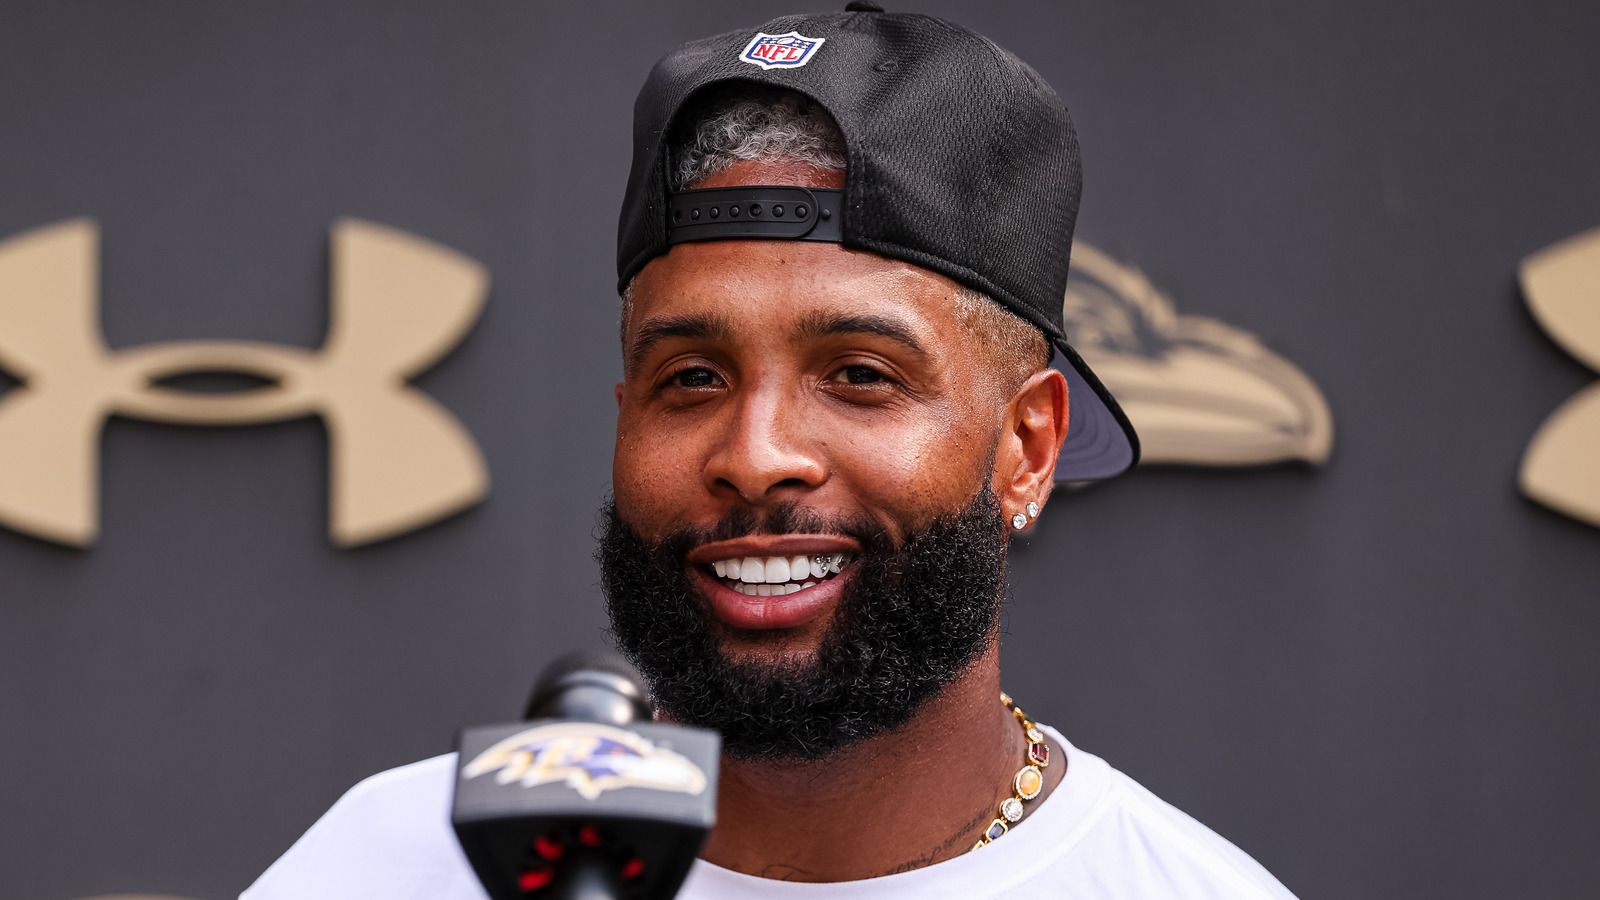 A Look At Odell Beckham Jr.'s Star-Studded Dating History